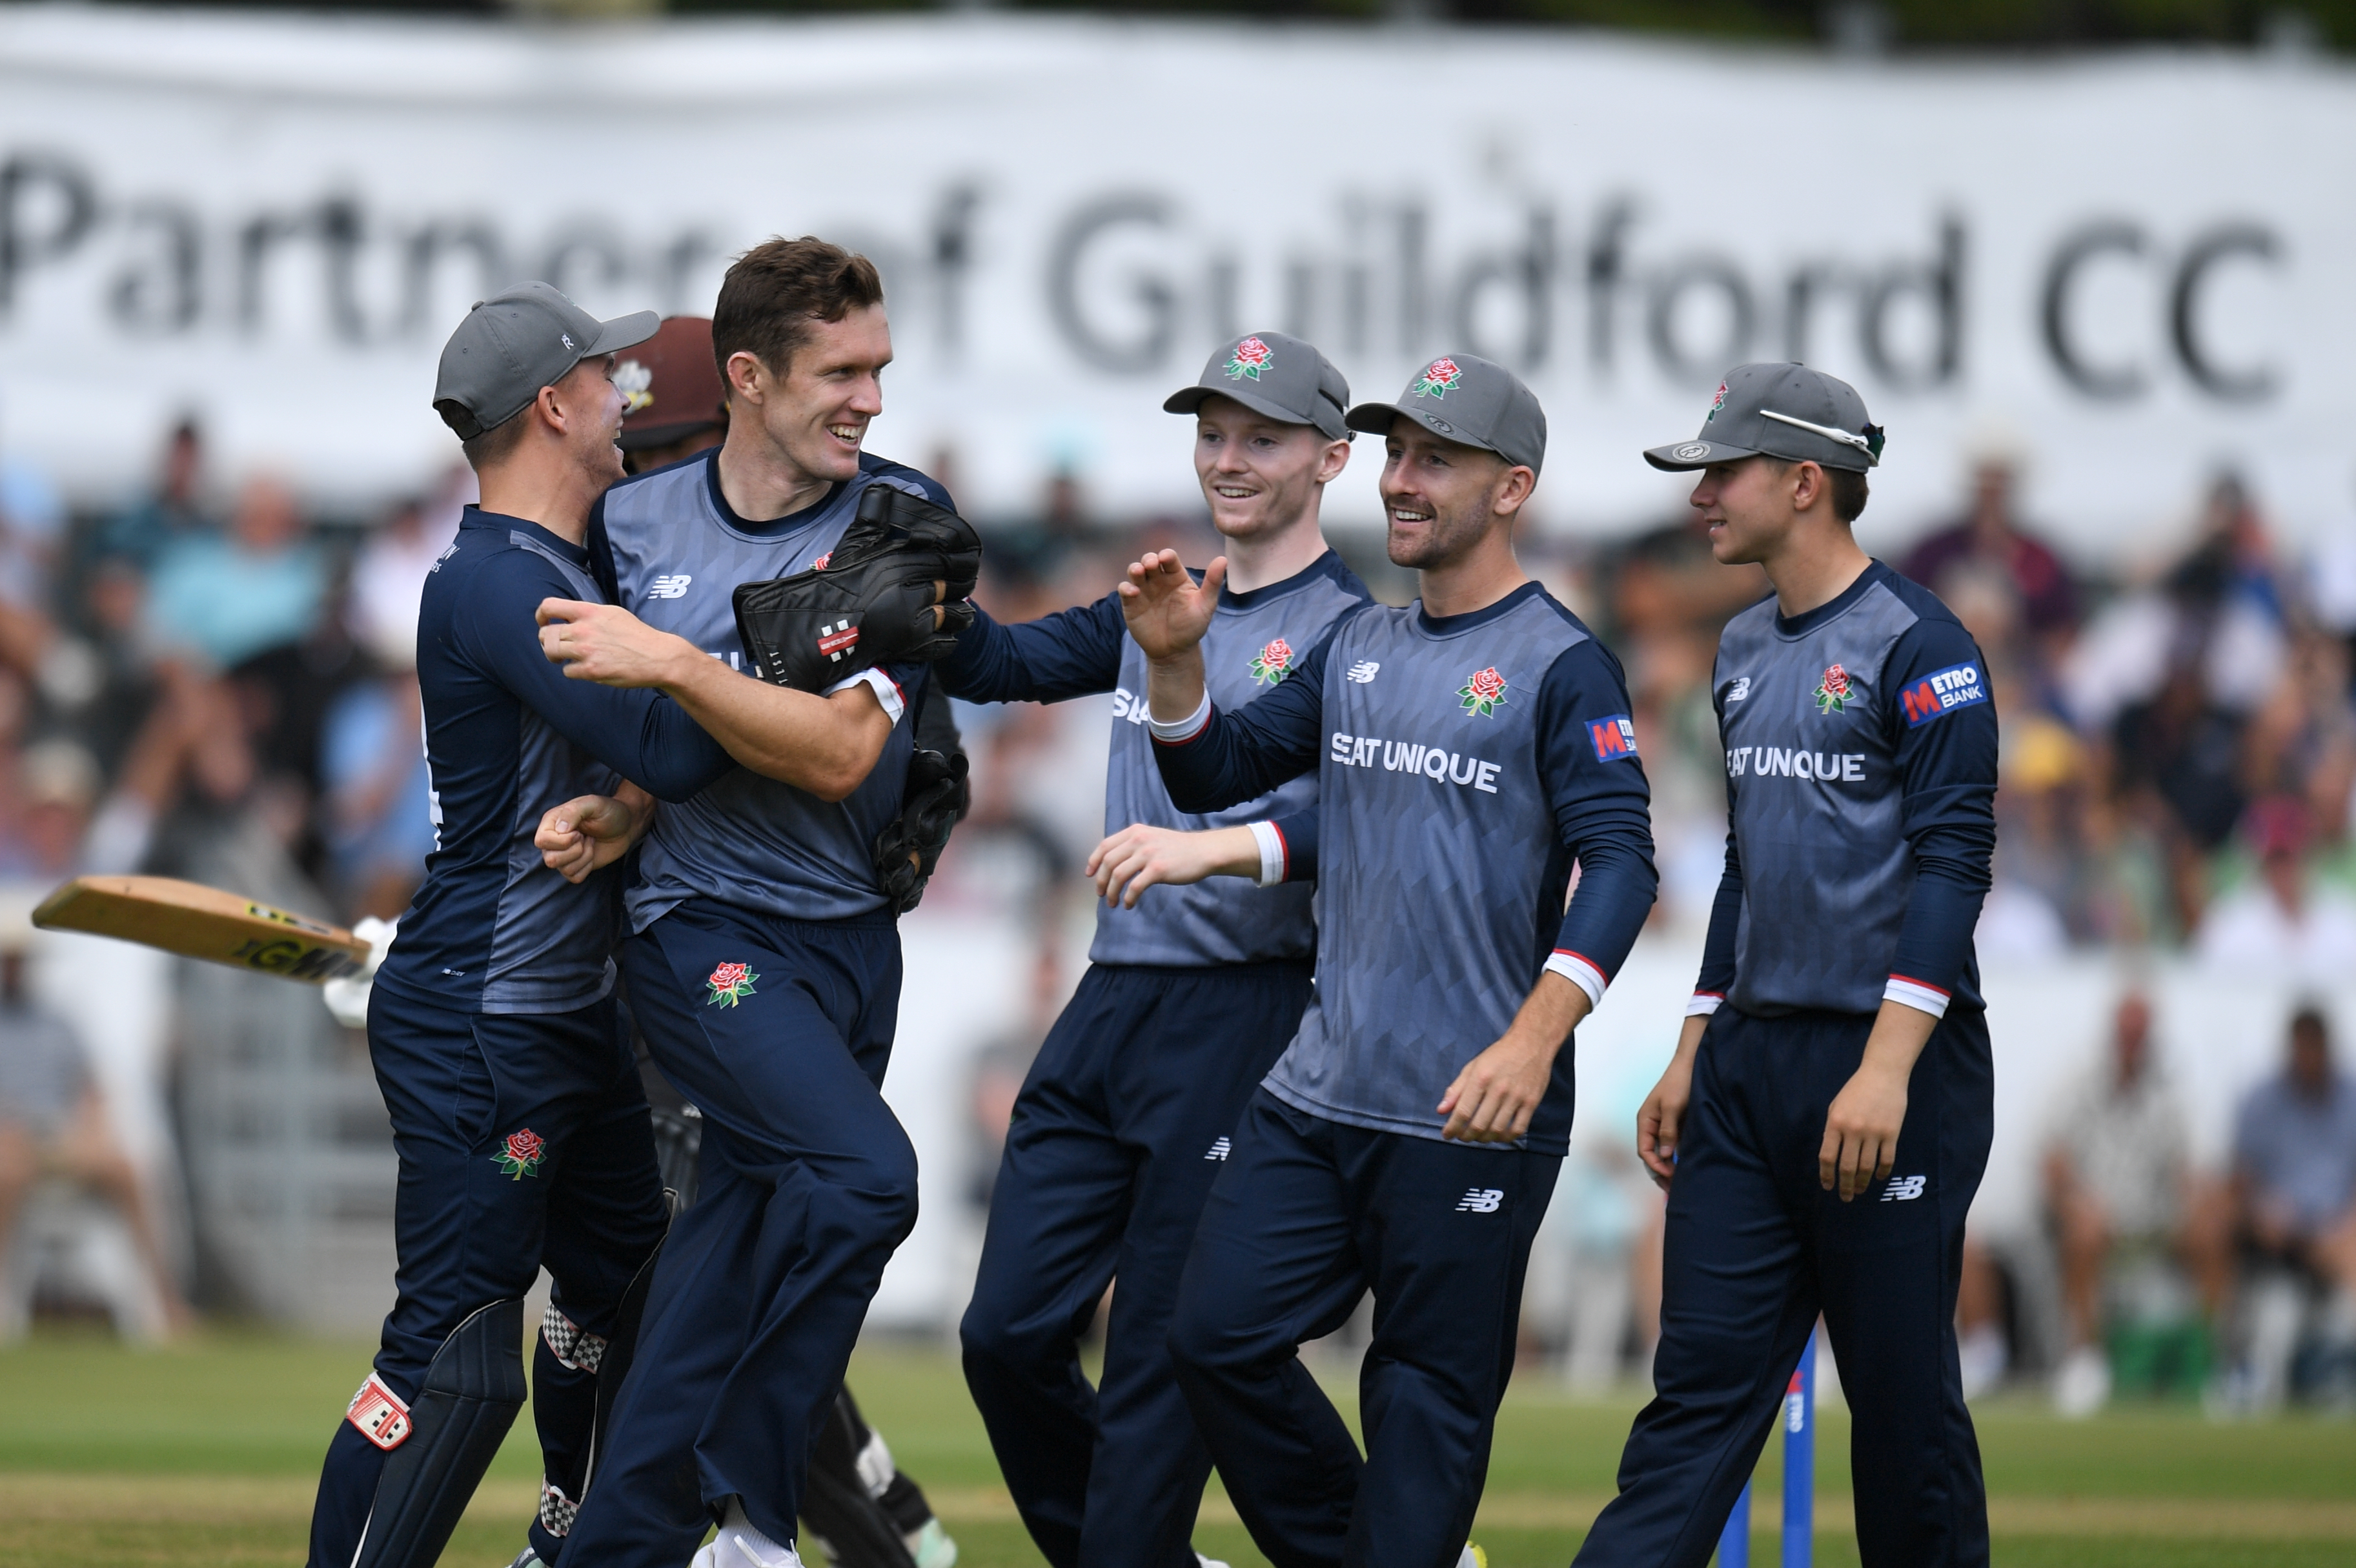 MATCH PREVIEW: Middlesex vs Lancashire